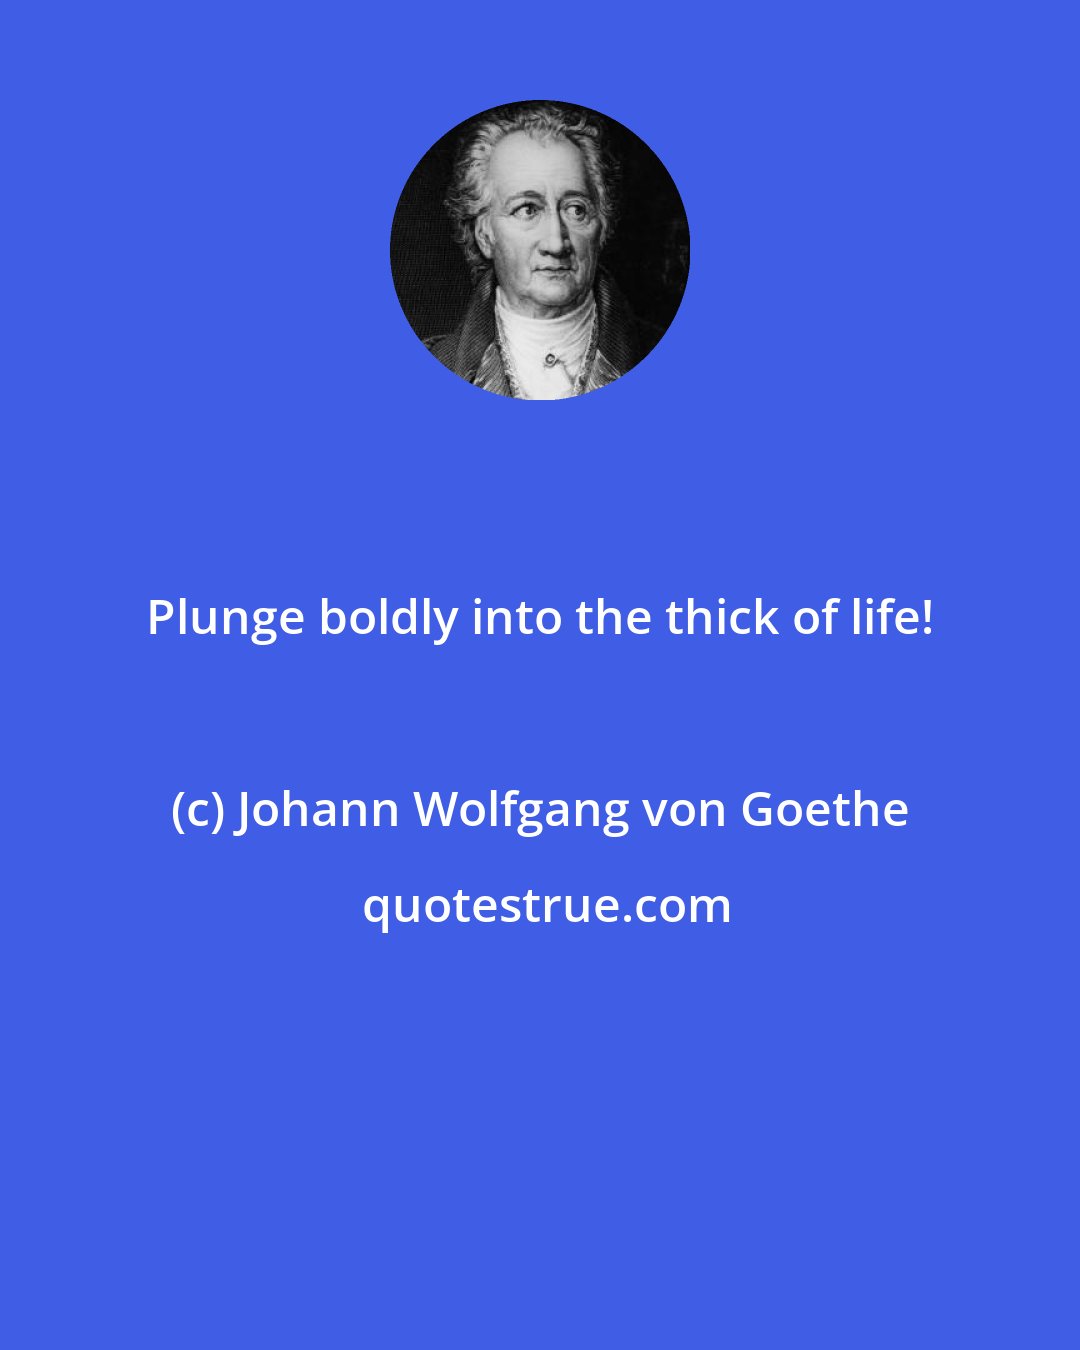 Johann Wolfgang von Goethe: Plunge boldly into the thick of life!